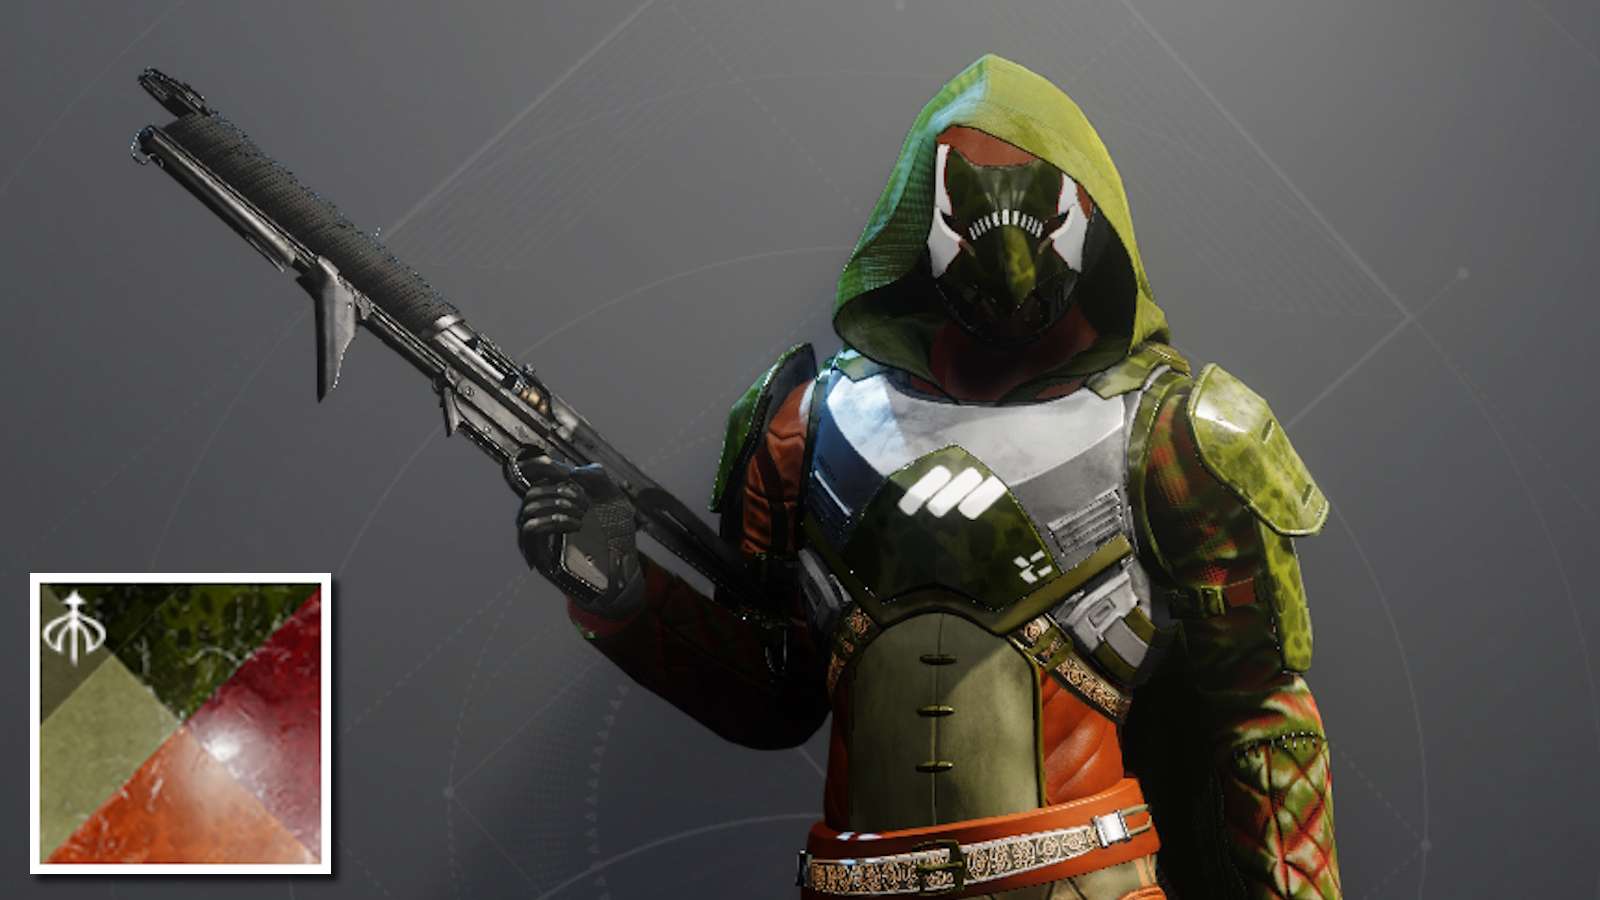 New Timed Prime shader available from Destiny 2 Prime Gaming bundle.